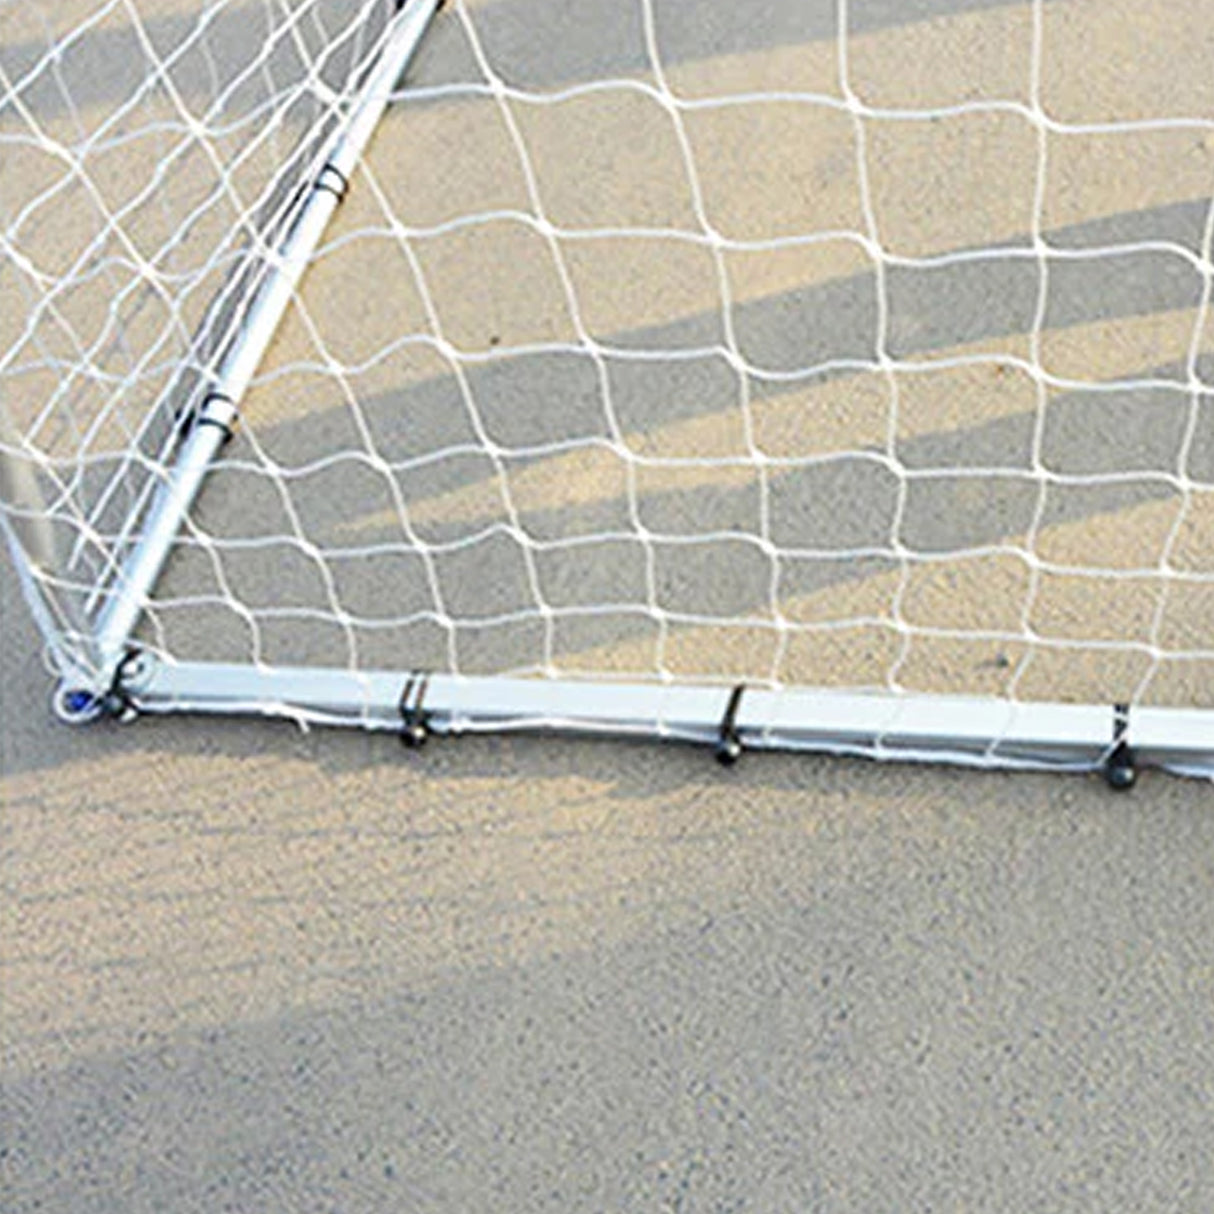 DS Replacement Football Nets